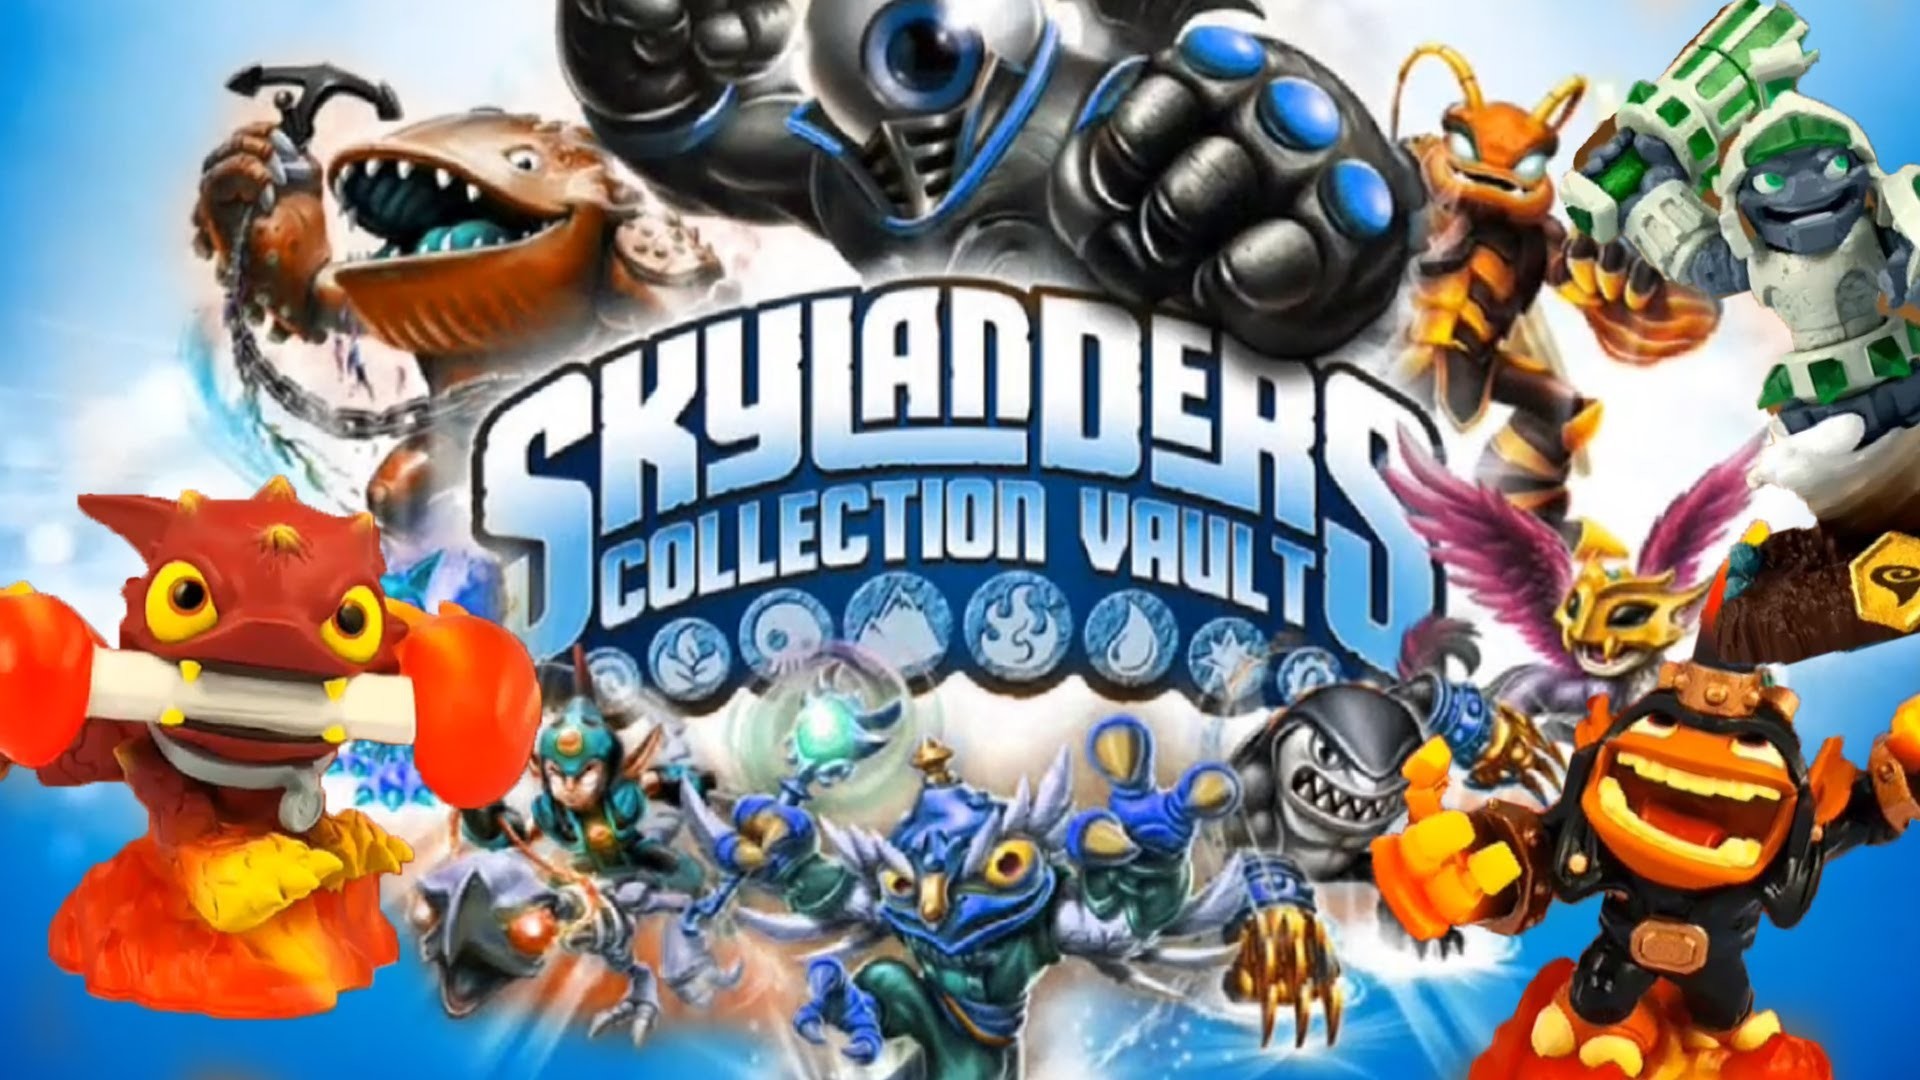 1920x1080 187 Skylanders Collection Vault - iOS App Overview + Give-Away (see  description) - YouTube